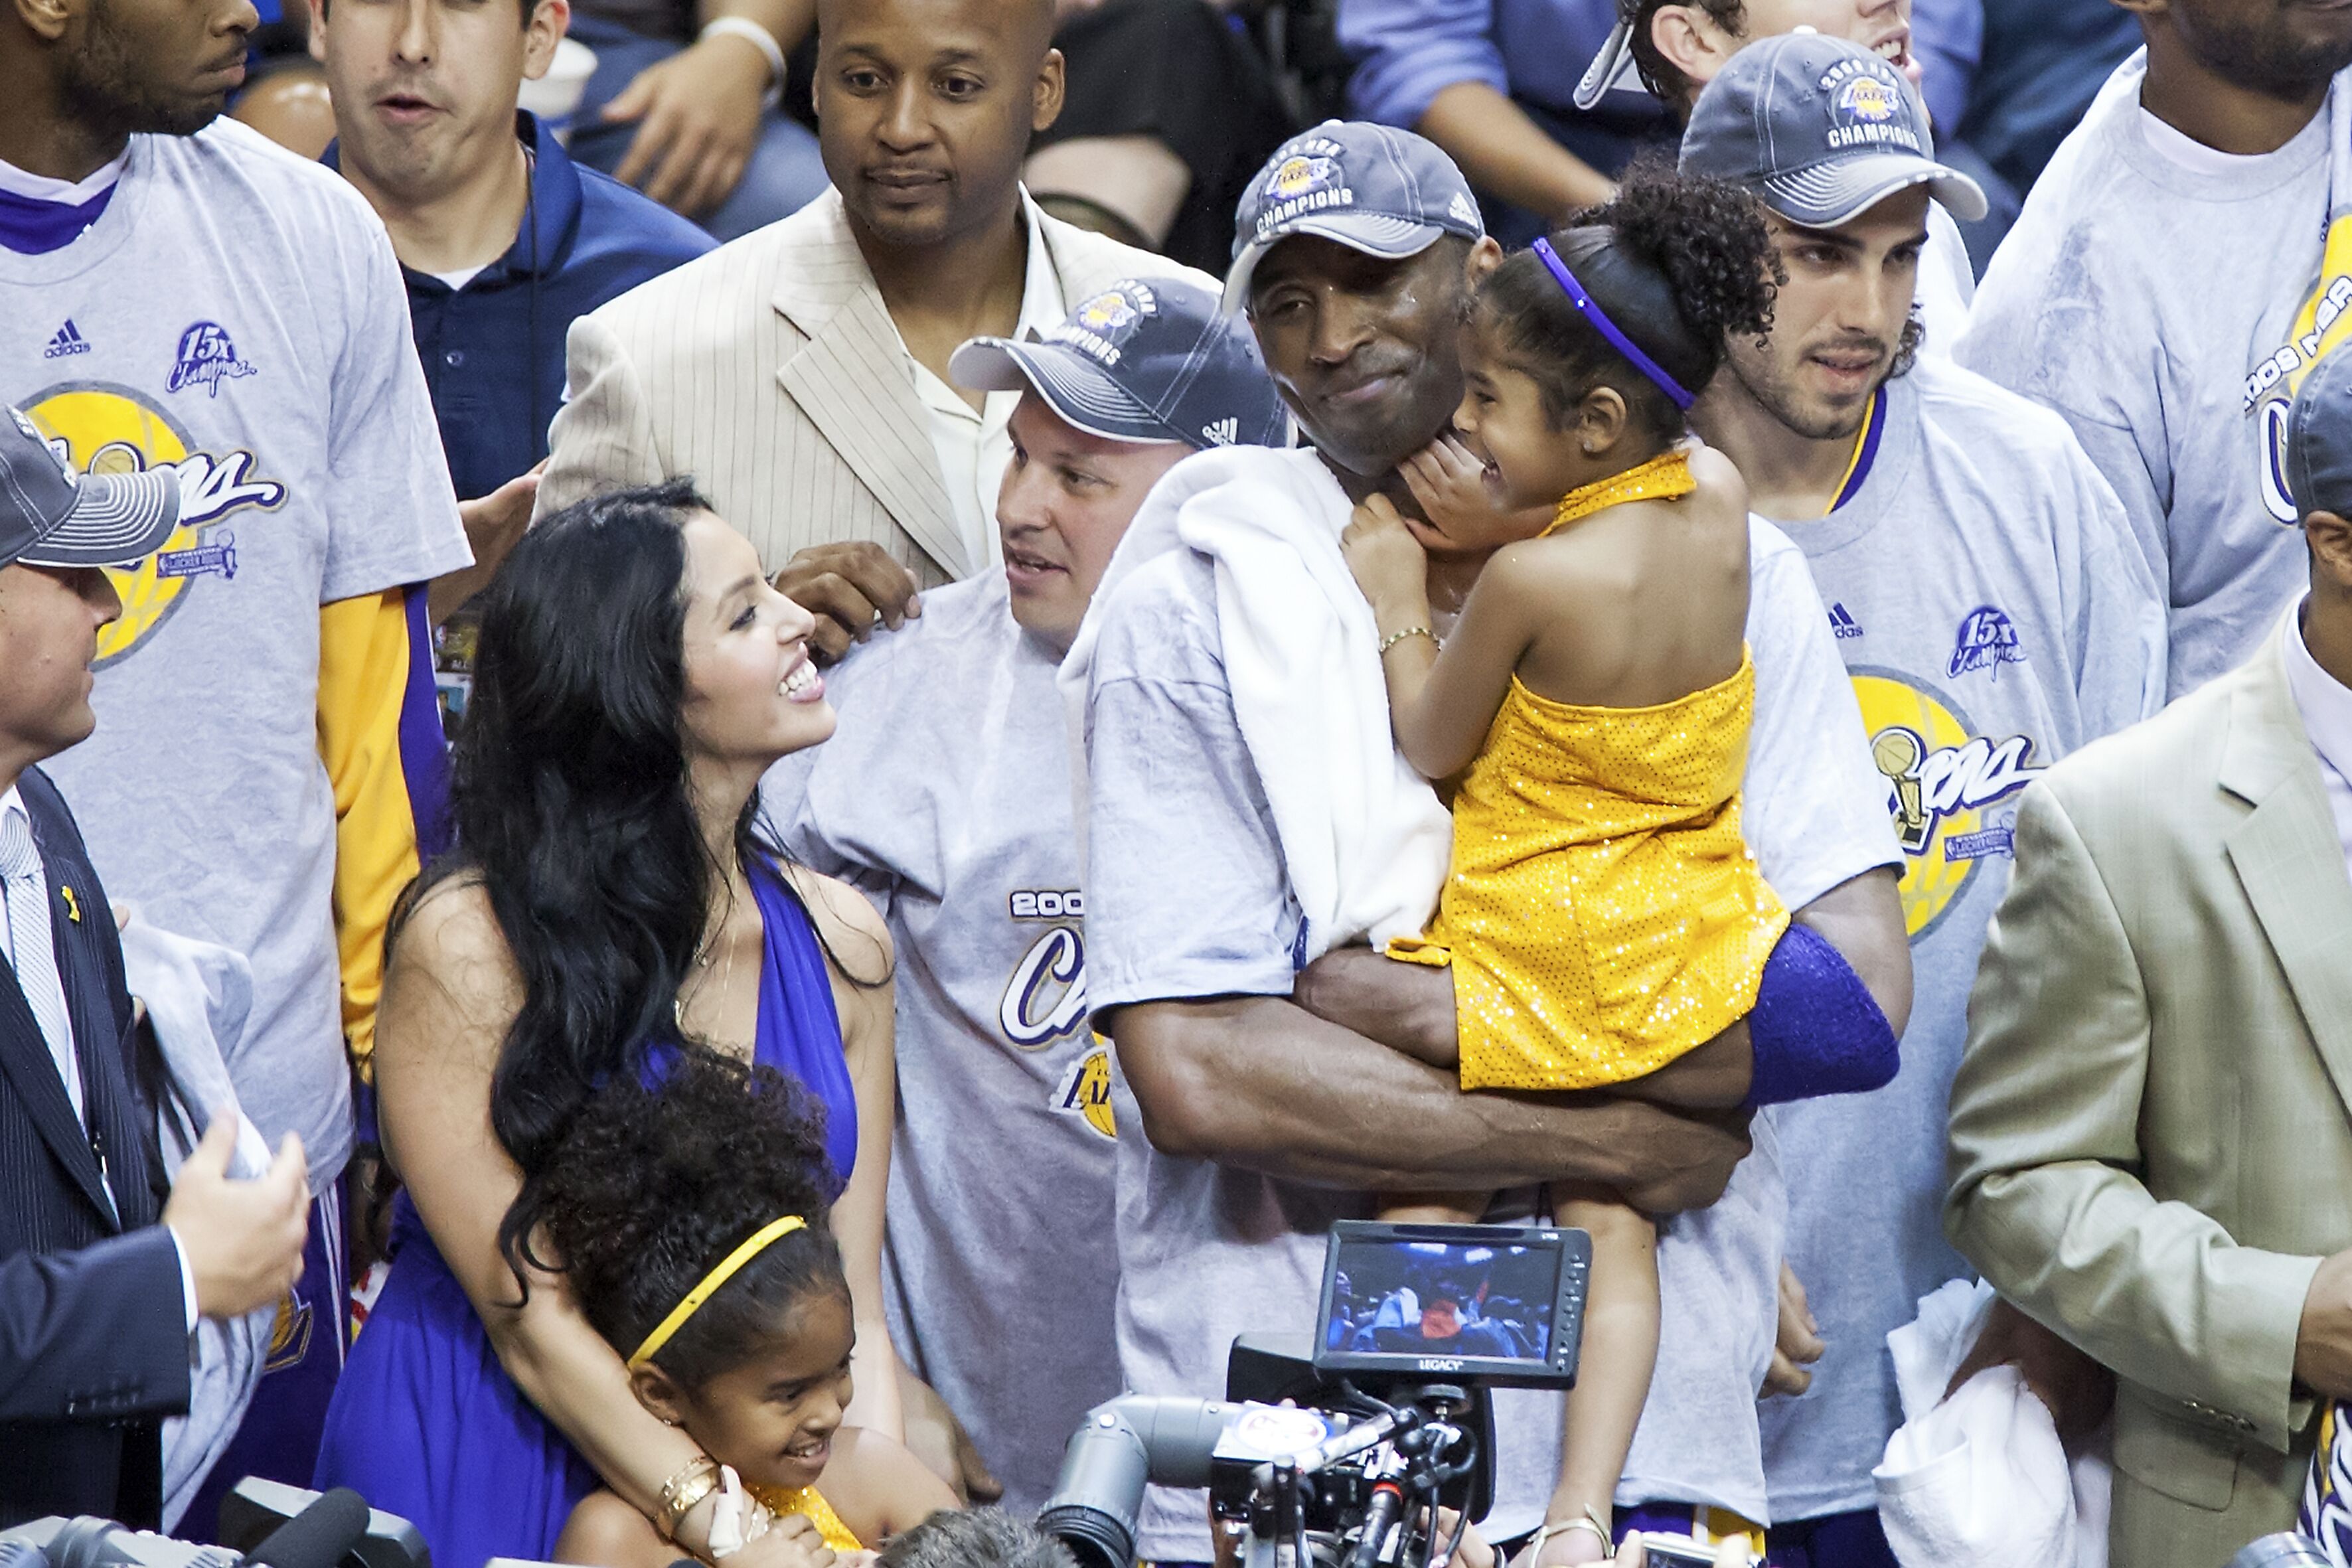 Kobe Bryant holds his daughter Gianna while standing next to her mother Vanessa after Game Five of the NBA Finals on June 14, 2009, in Orlando, Florida | Photo: Getty Images